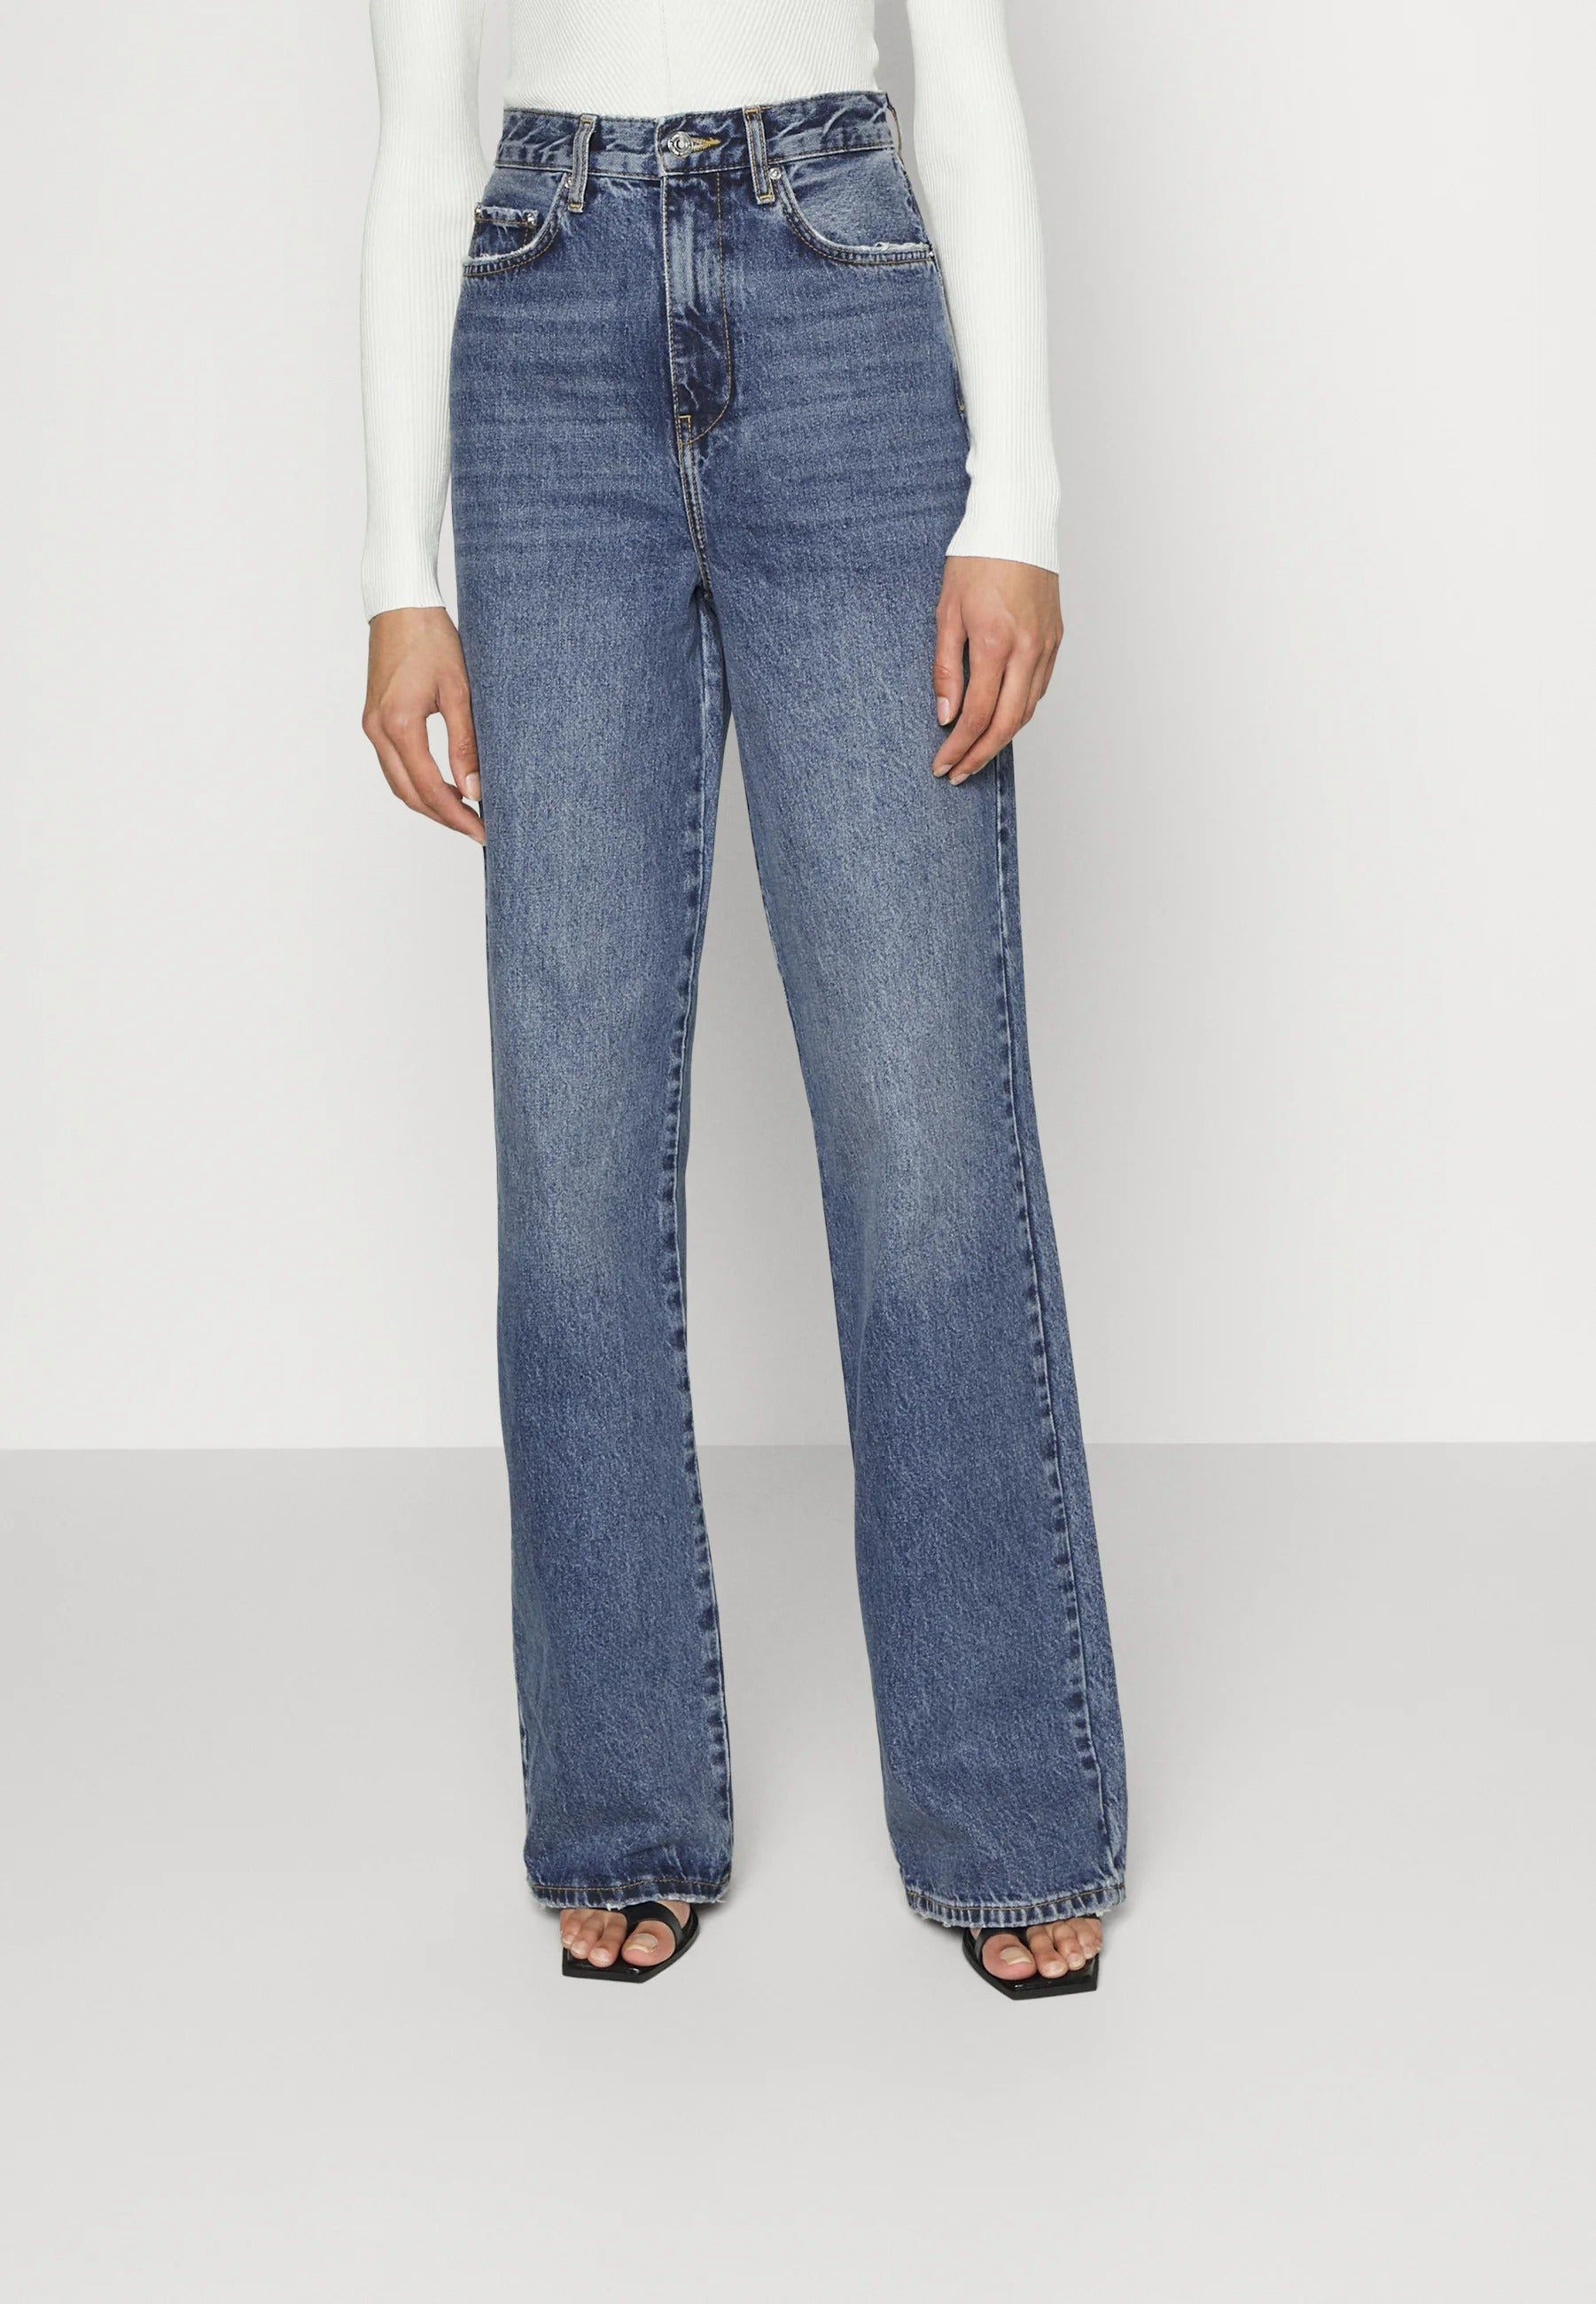 Vero Moda Tall + Relaxed fit jeans